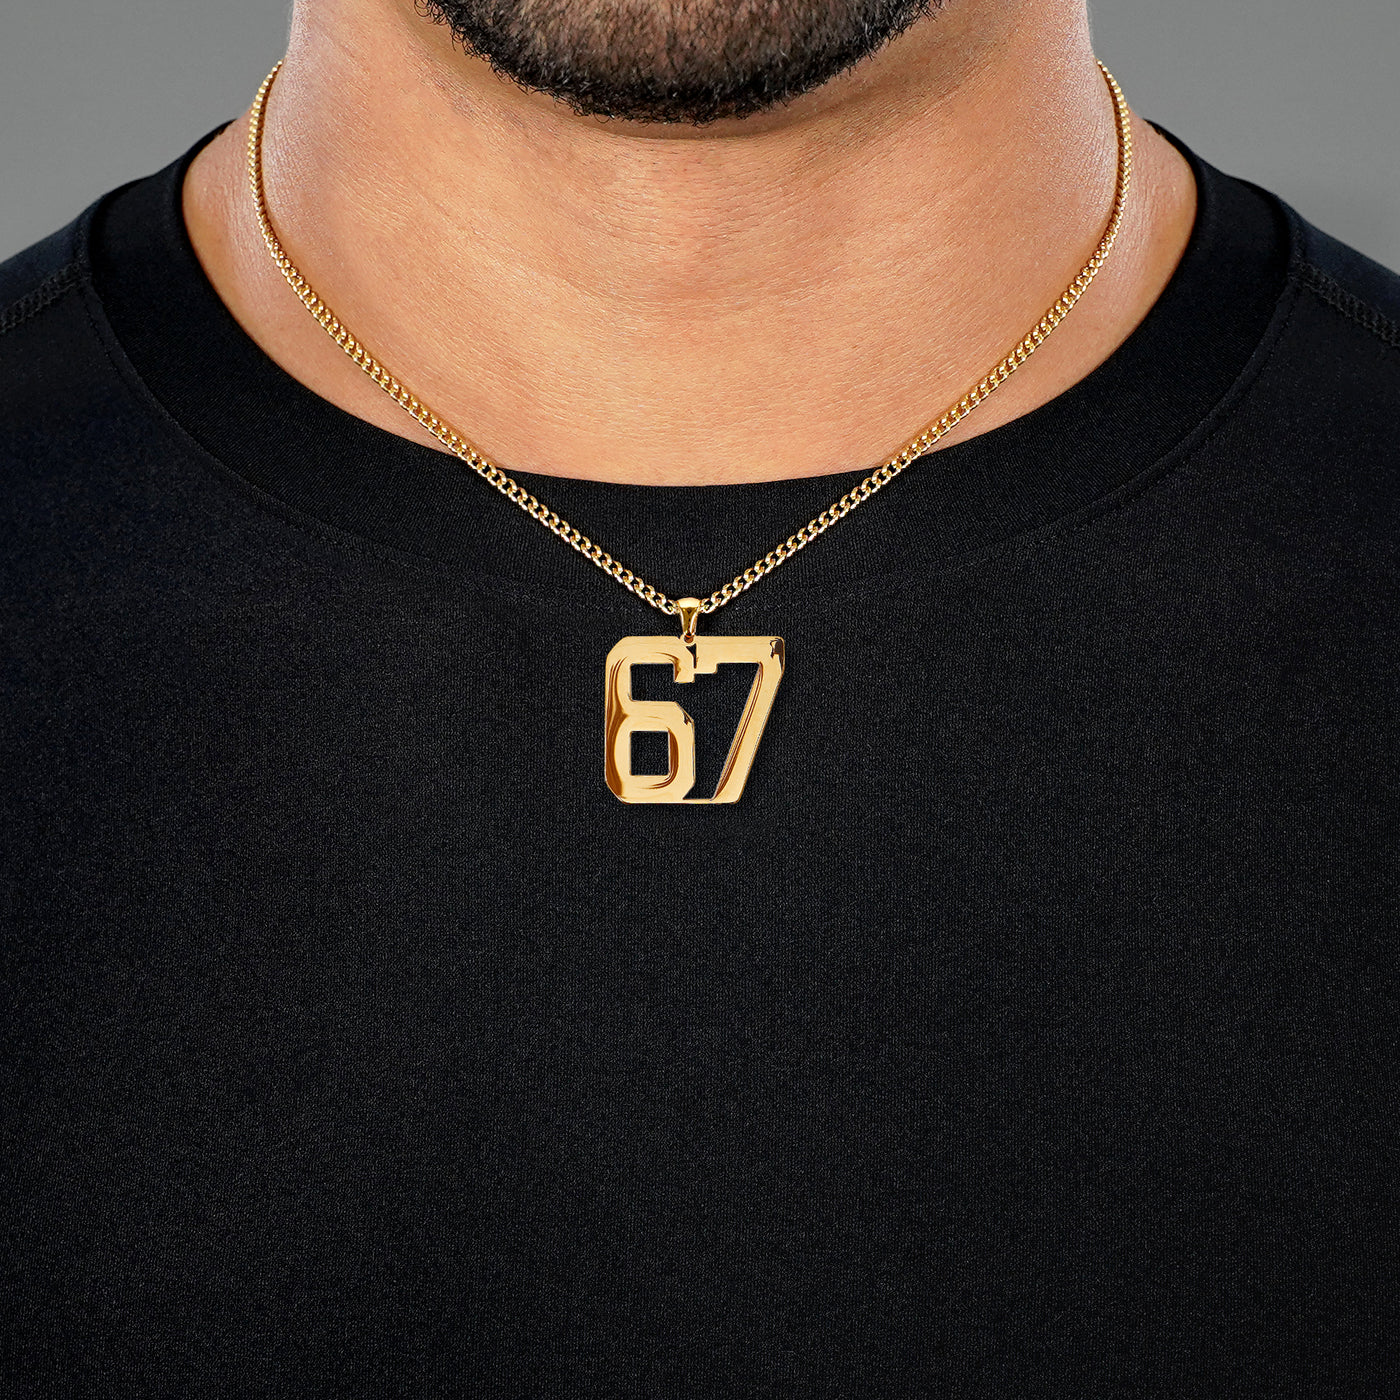 67 Number Pendant with Chain Necklace - Gold Plated Stainless Steel